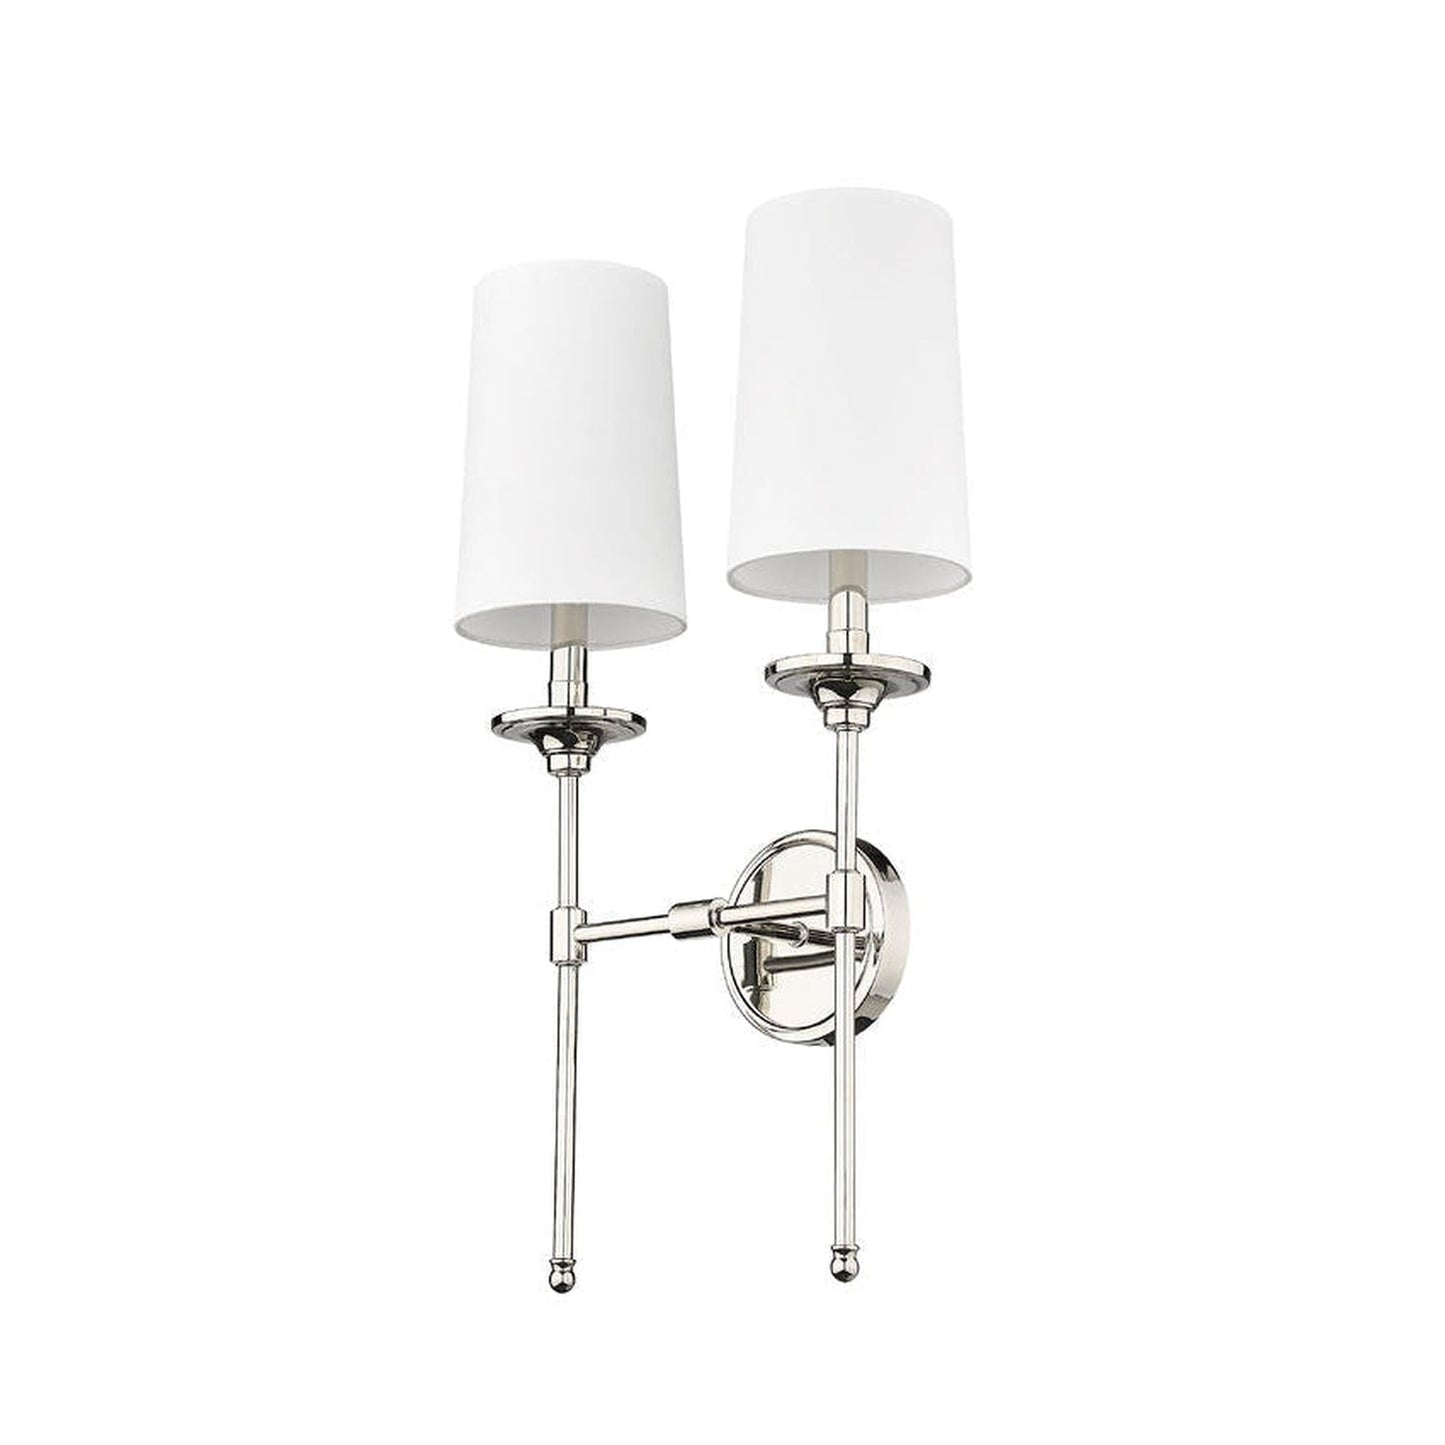 Z-Lite Emily 14" 2-Light Polished Nickel Wall Sconce With Off-White Cloth Shade